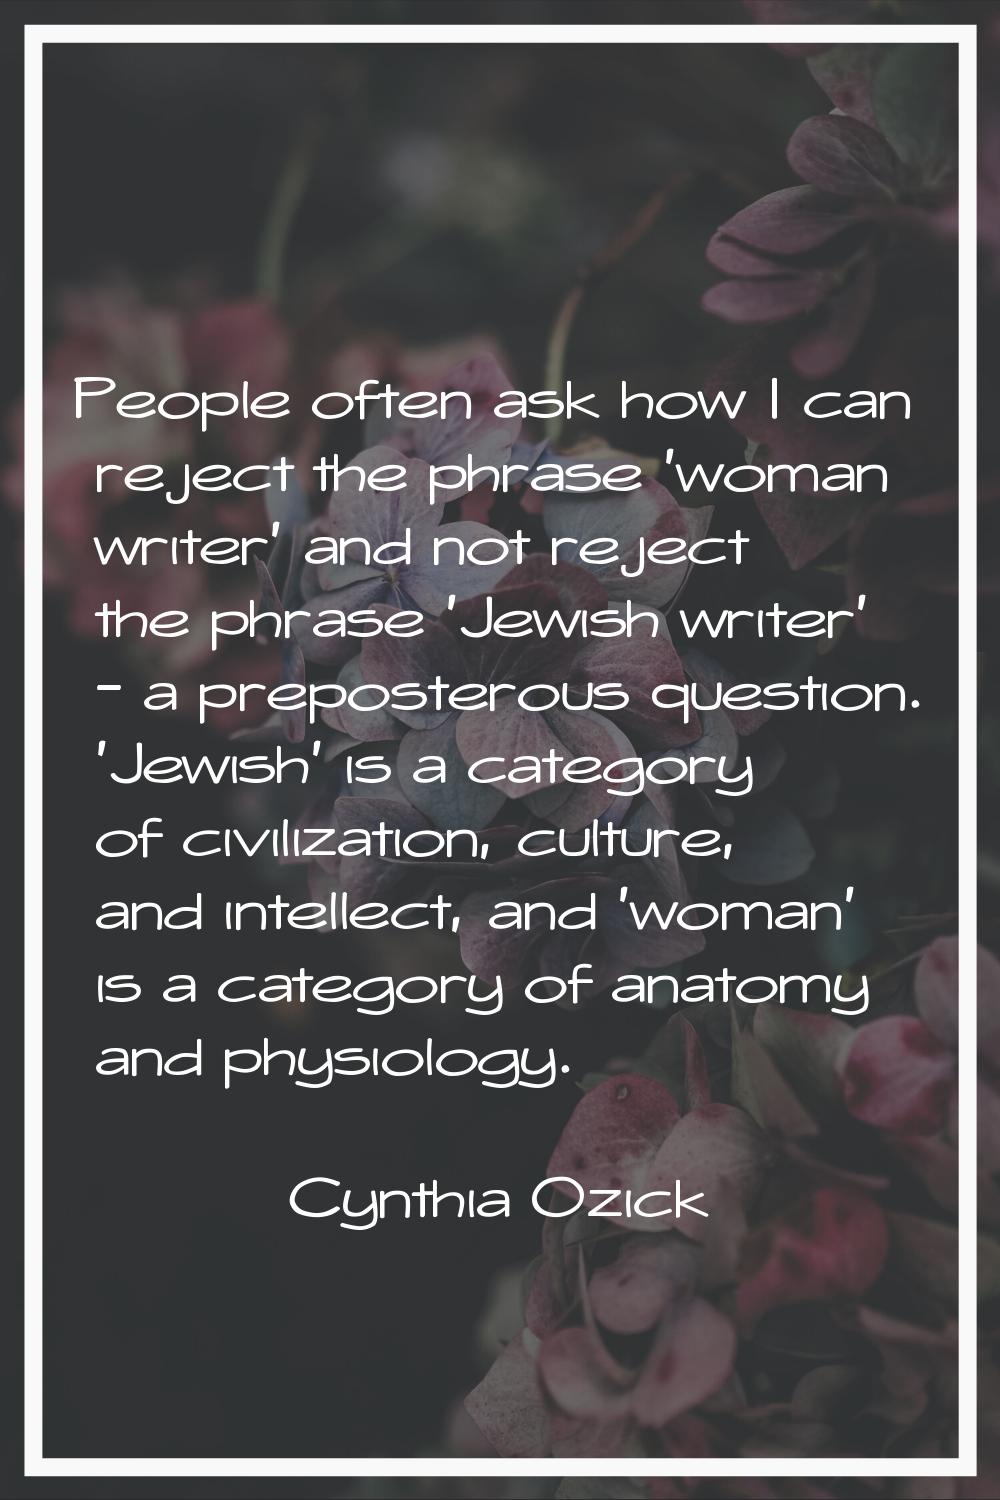 People often ask how I can reject the phrase 'woman writer' and not reject the phrase 'Jewish write